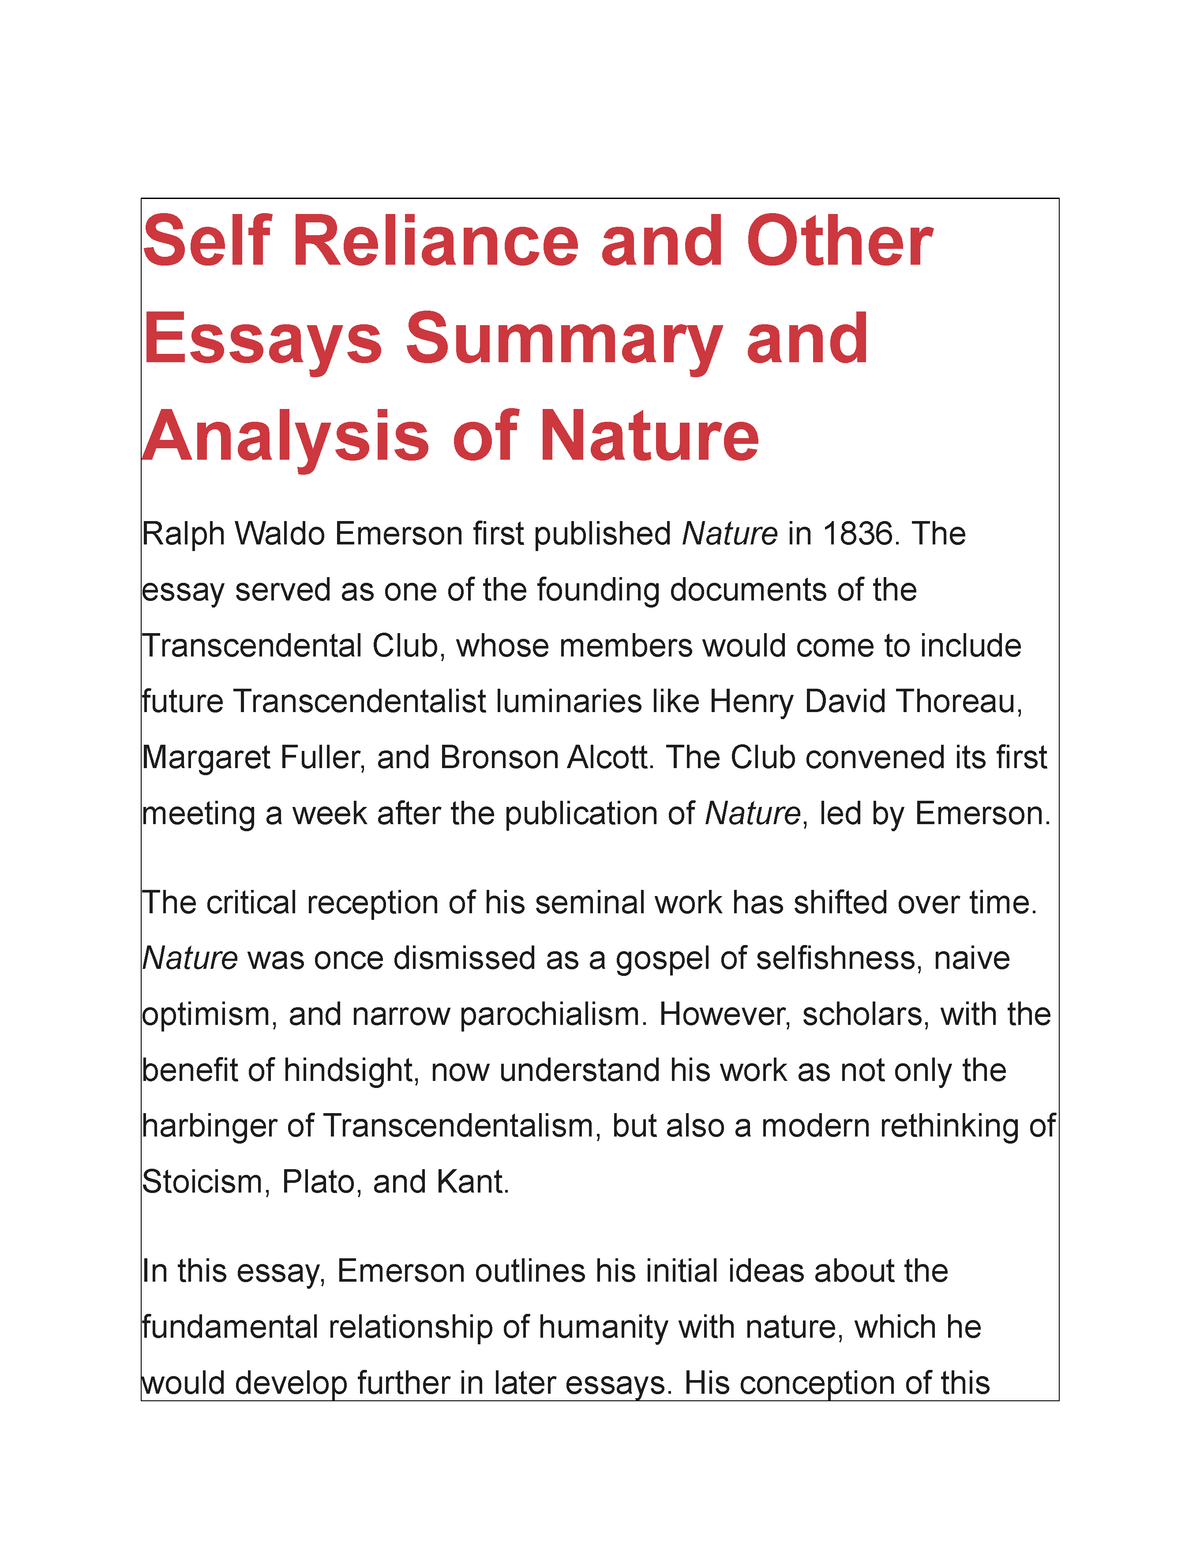 nature essay by emerson summary